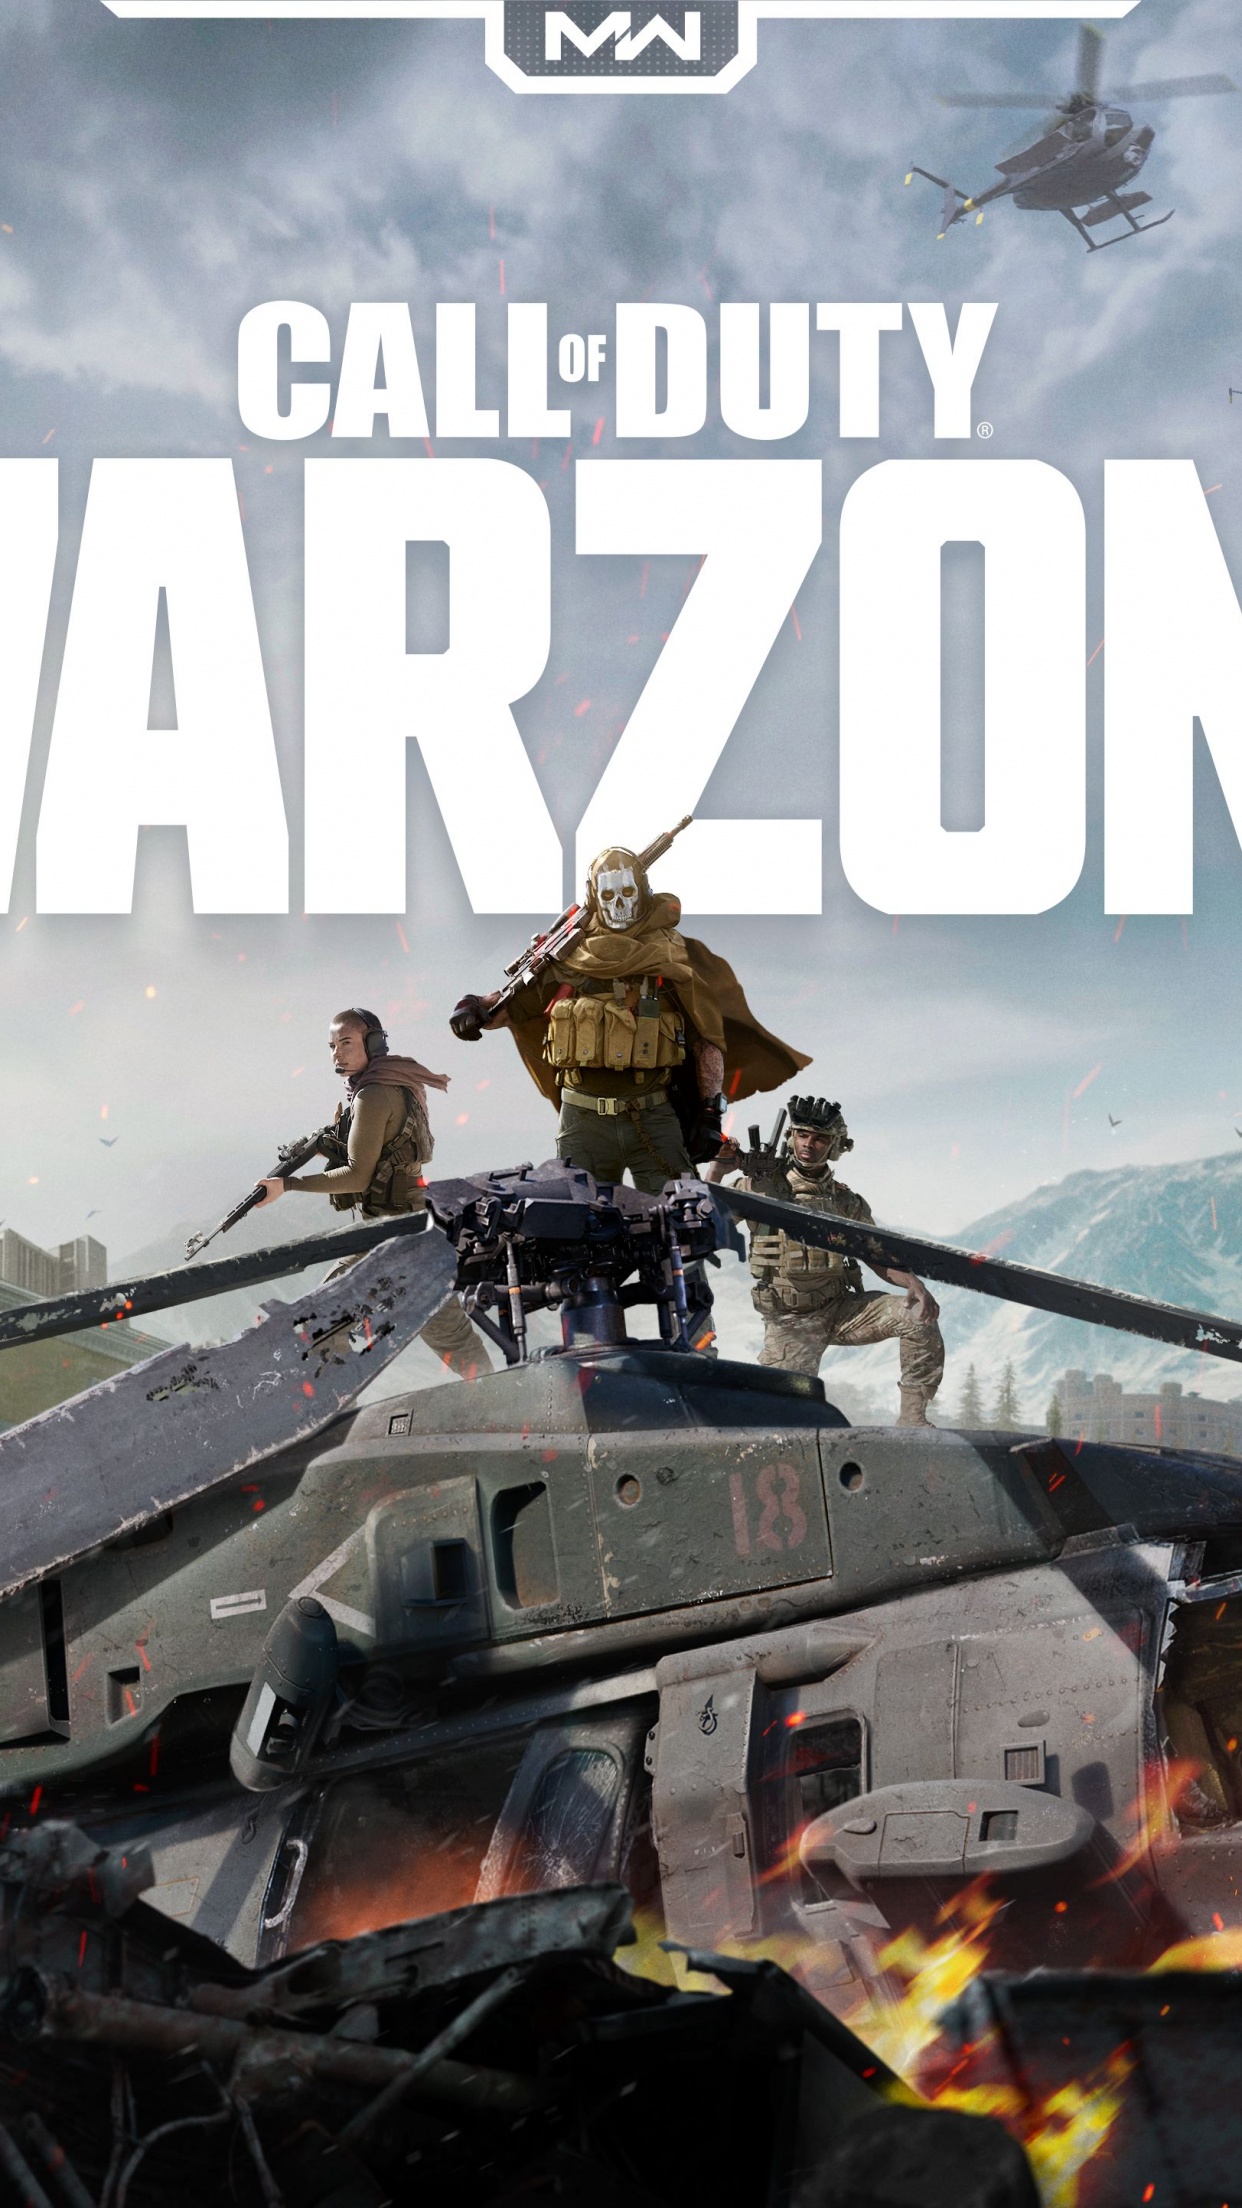 Call of Duty Warzone Wallpaper 4K, Xbox One, PlayStation 4, PC Games